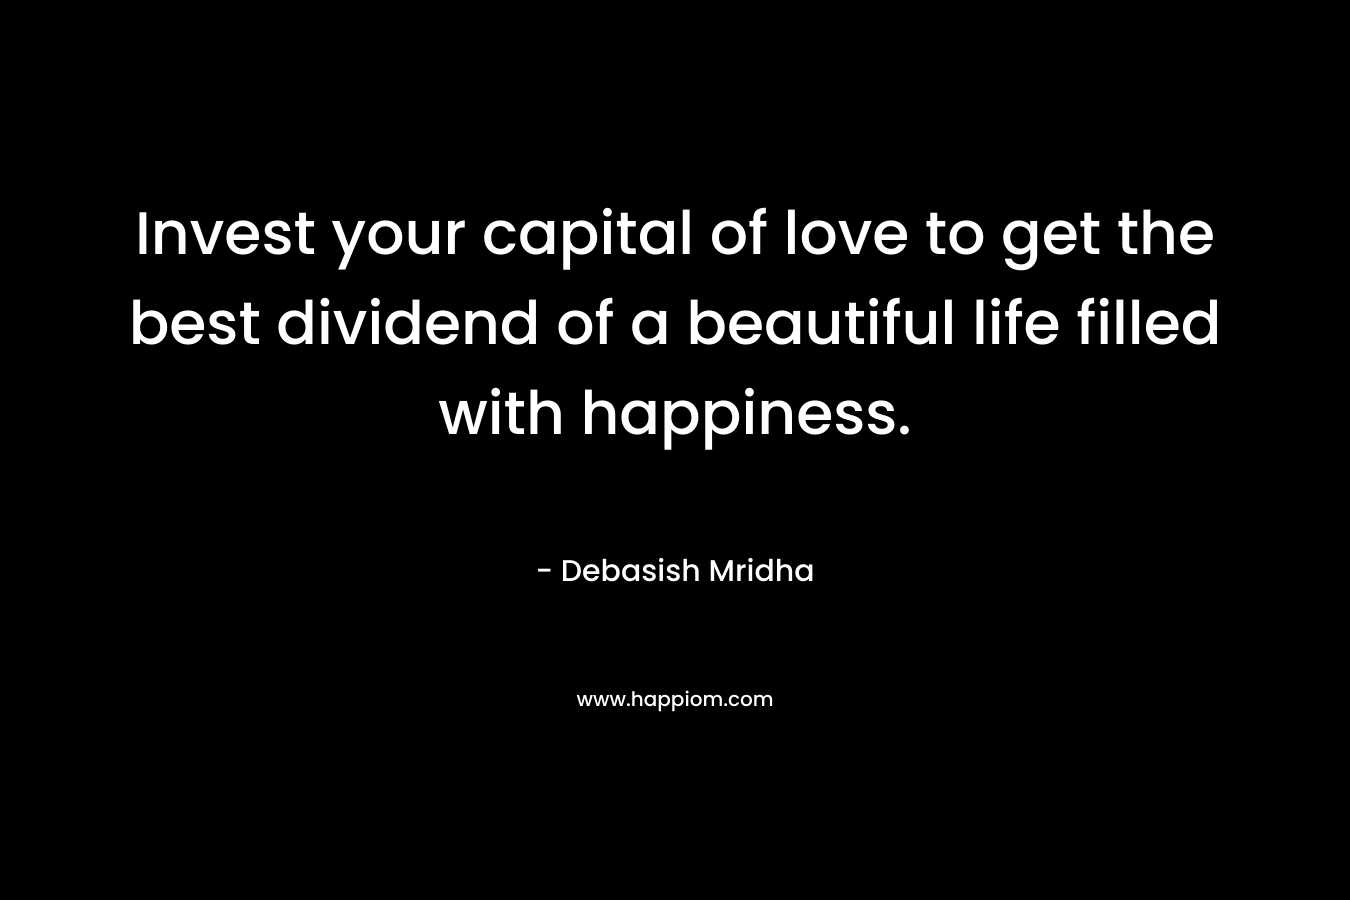 Invest your capital of love to get the best dividend of a beautiful life filled with happiness. – Debasish Mridha